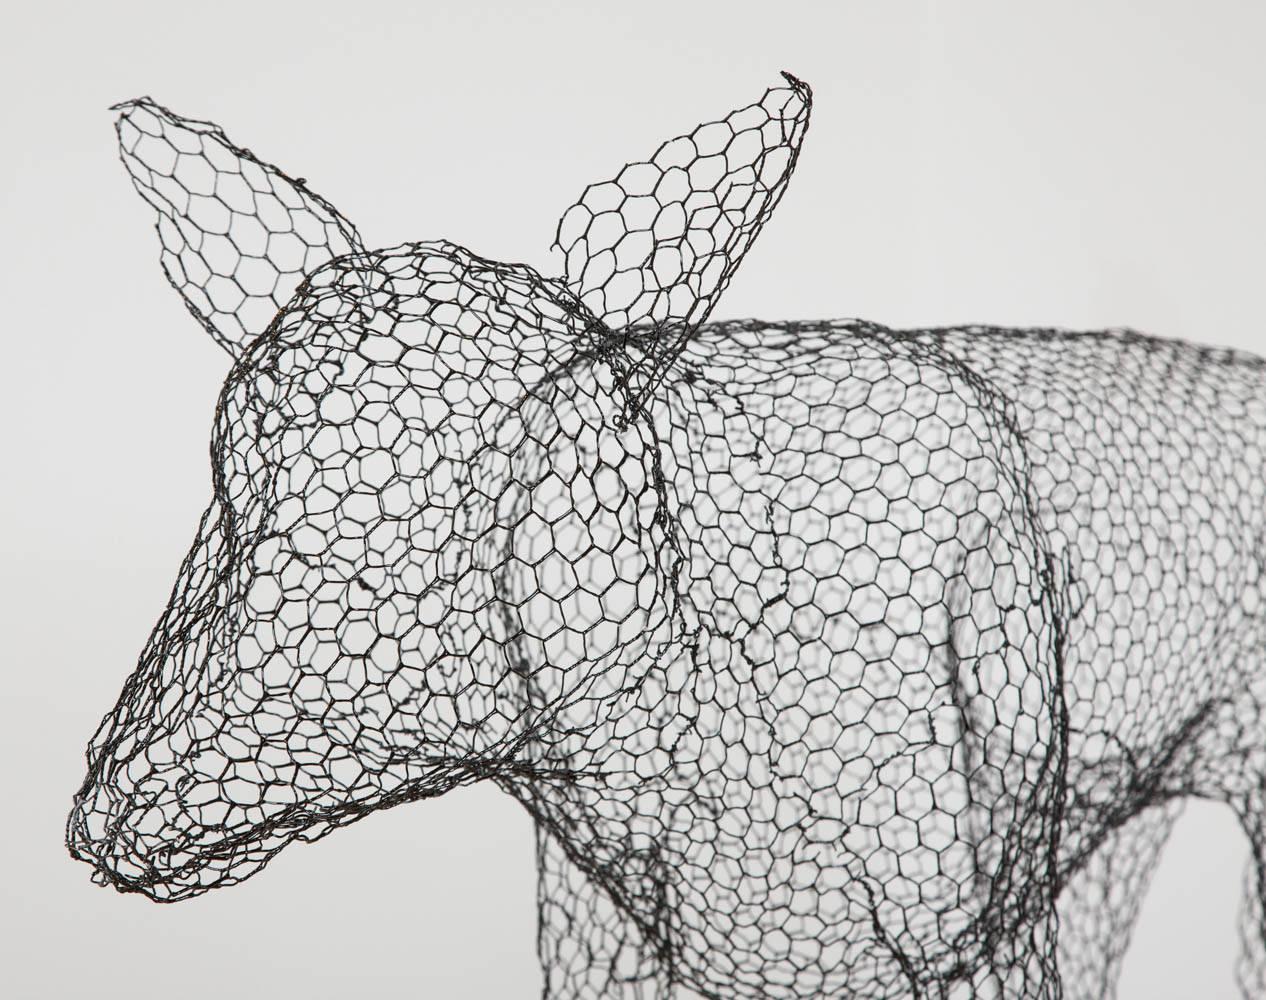 Hand-formed wire sculpture of a wolf,
finished in black enamel paint.